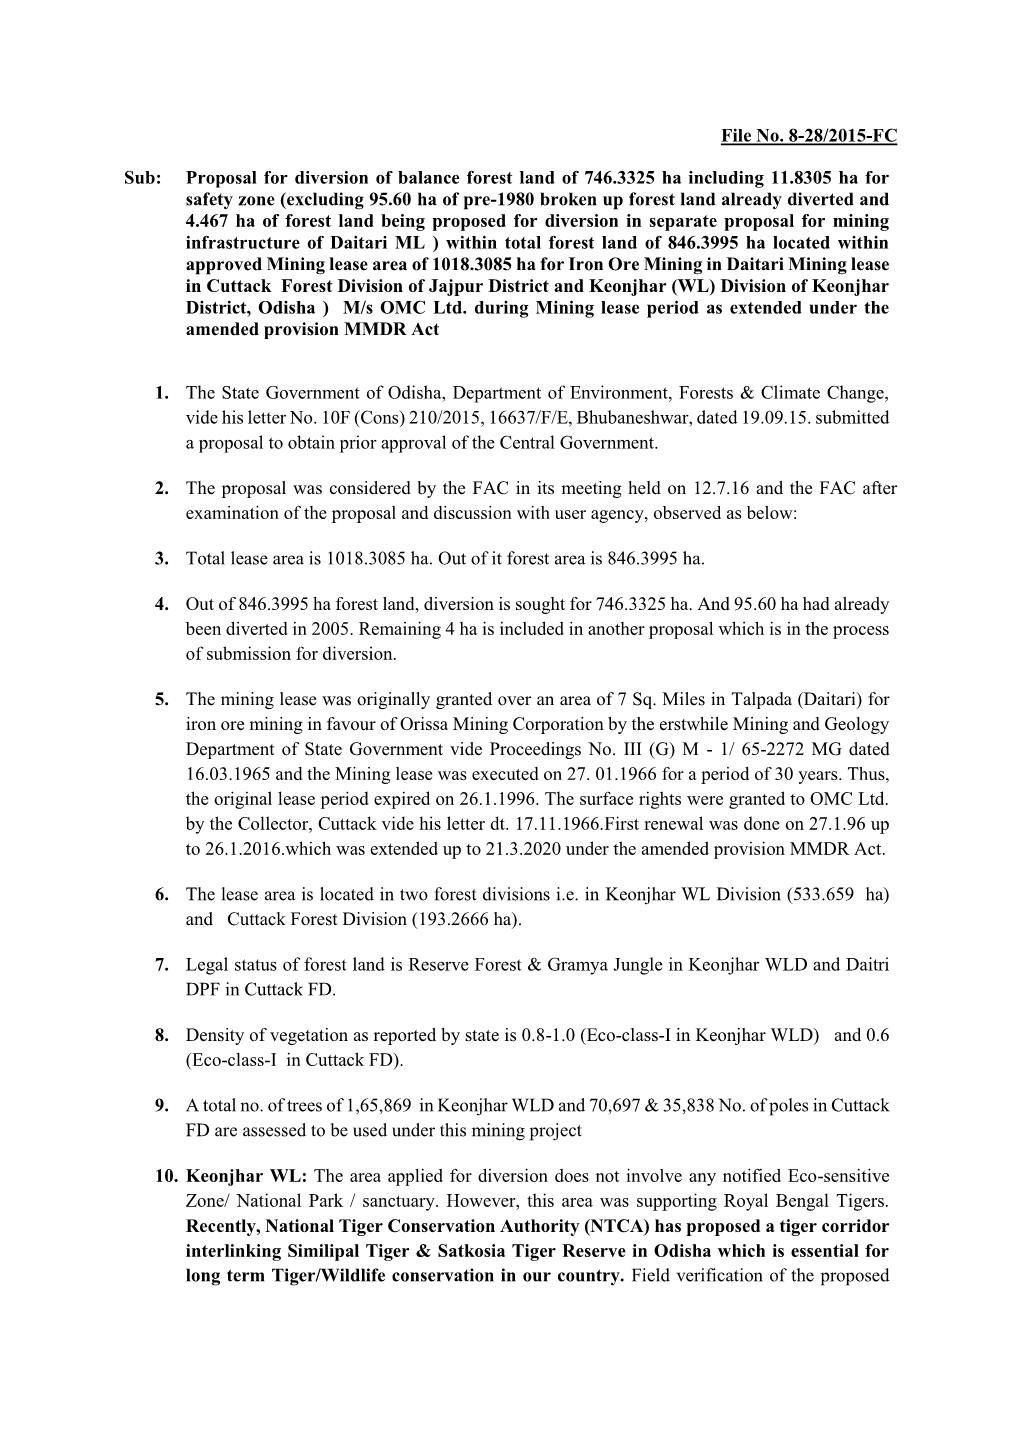 File No. 8-28/2015-FC Sub: Proposal for Diversion of Balance Forest Land